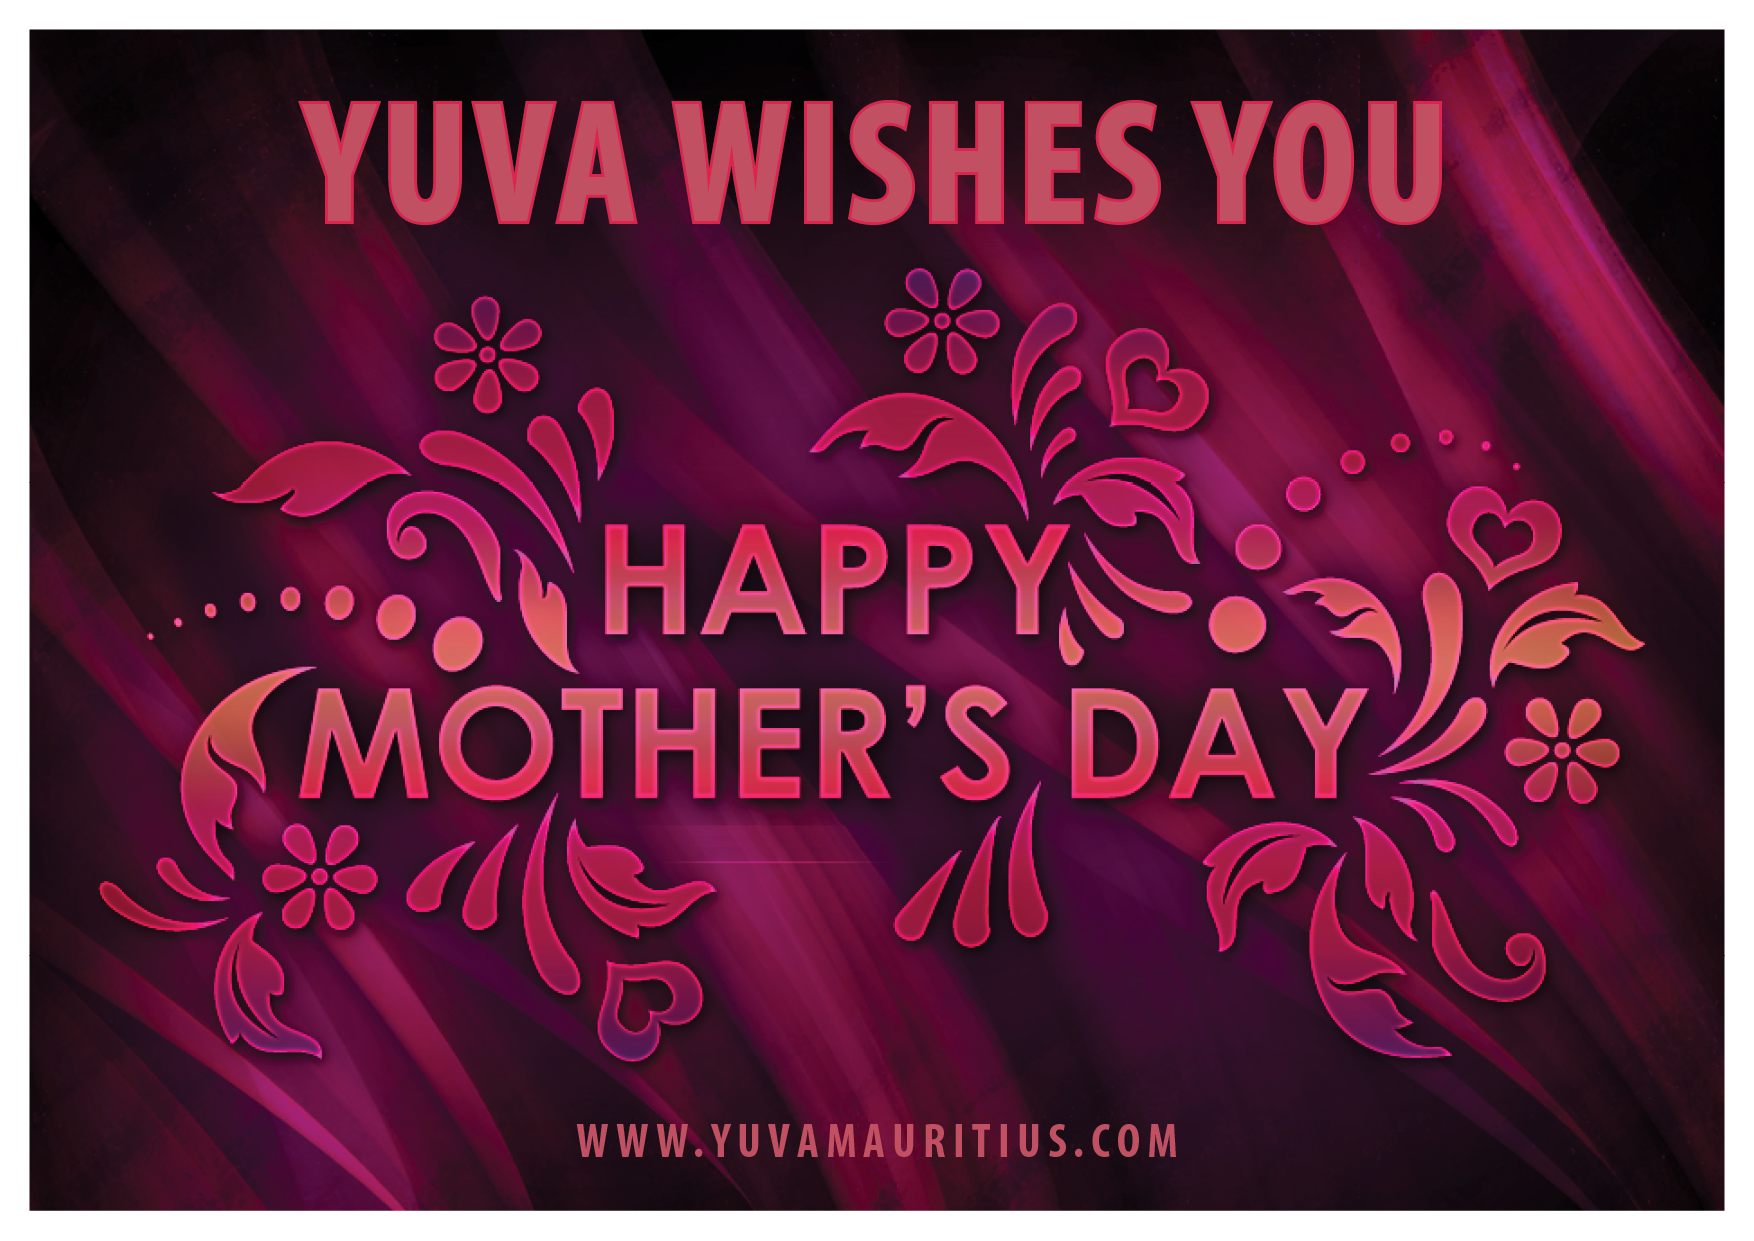 YUVA Celebrates Mother’s Day with 5000 Mothers